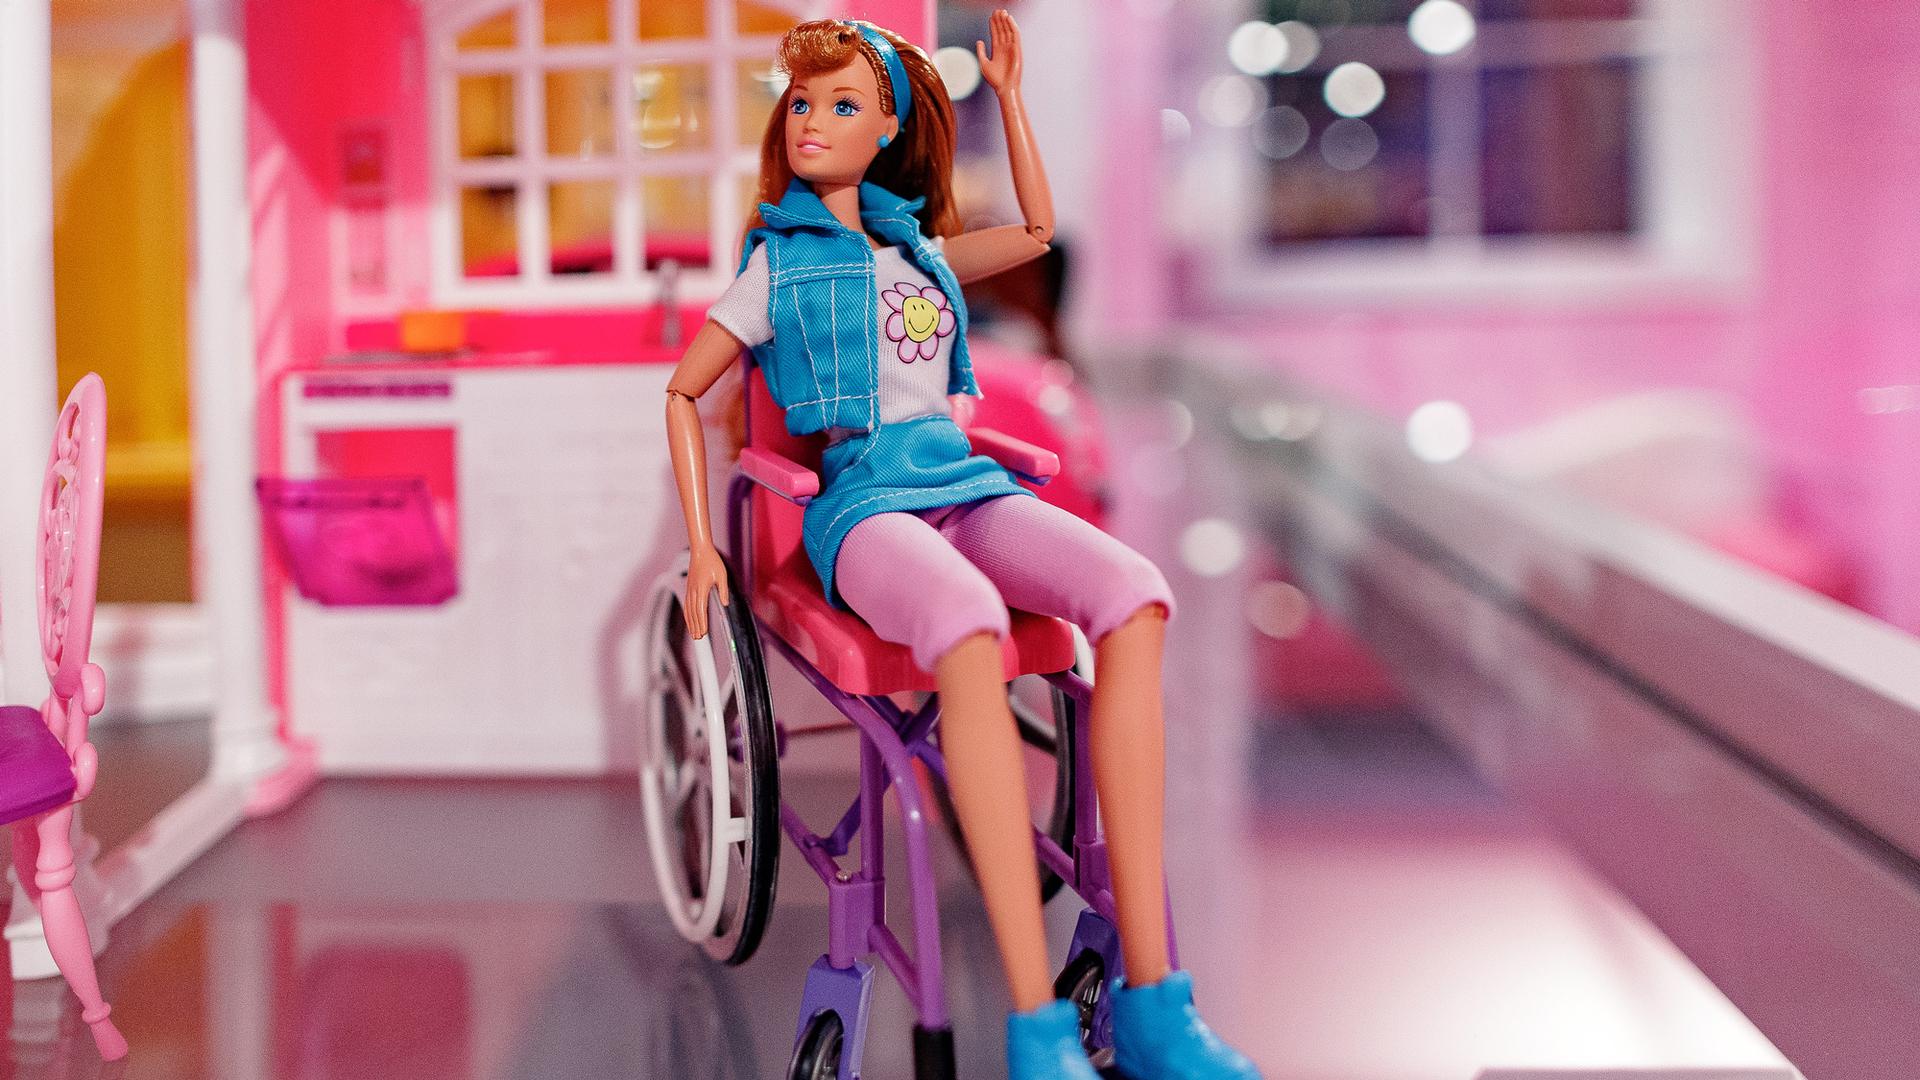  A 'Becky' barbie doll on display at an exhibition in Madrid, Spain.